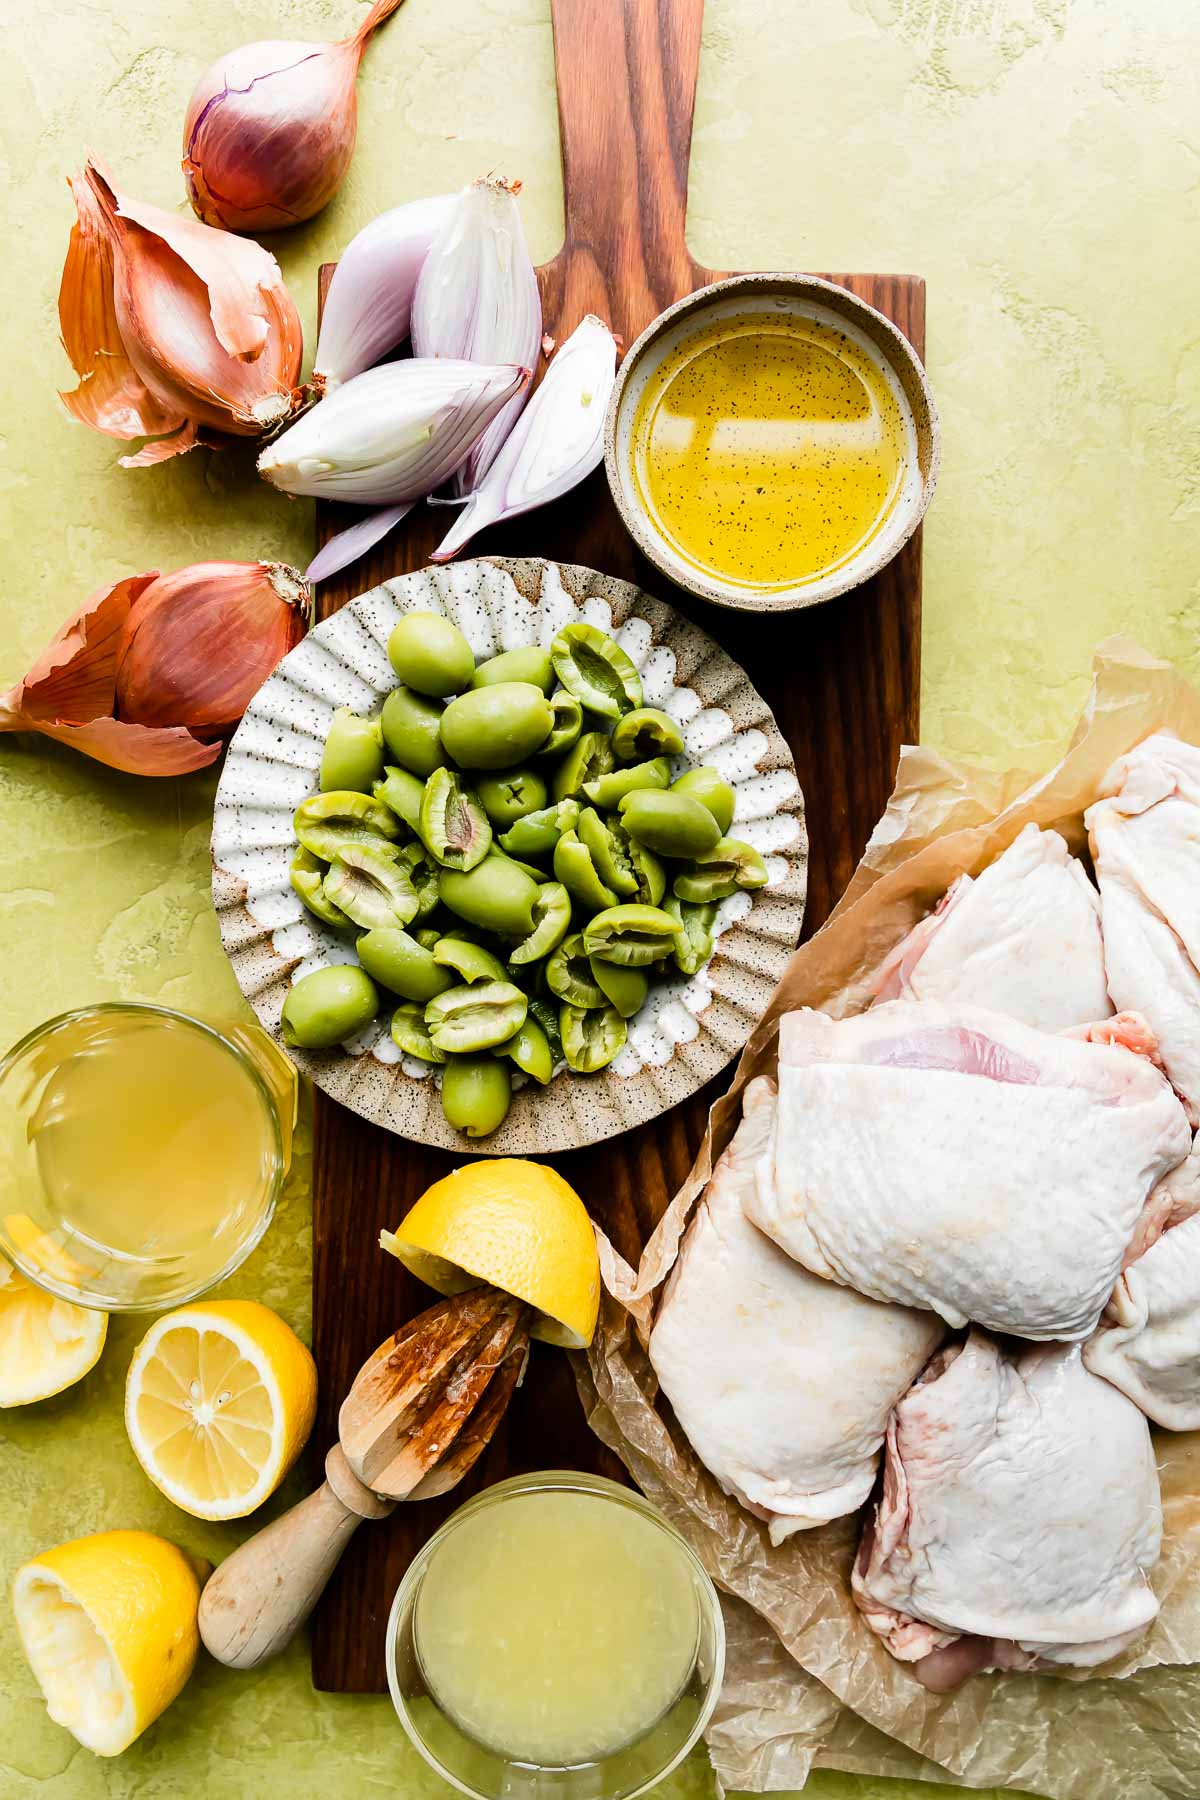 Olive chicken skillet ingredients laying on a yellow surface and wood cutting board: a dish of olive oil, a scalloped plate with green olives, chicken thighs, shallots, lemons (and lemon juice in a small bowl) & chicken stock in a small bowl.